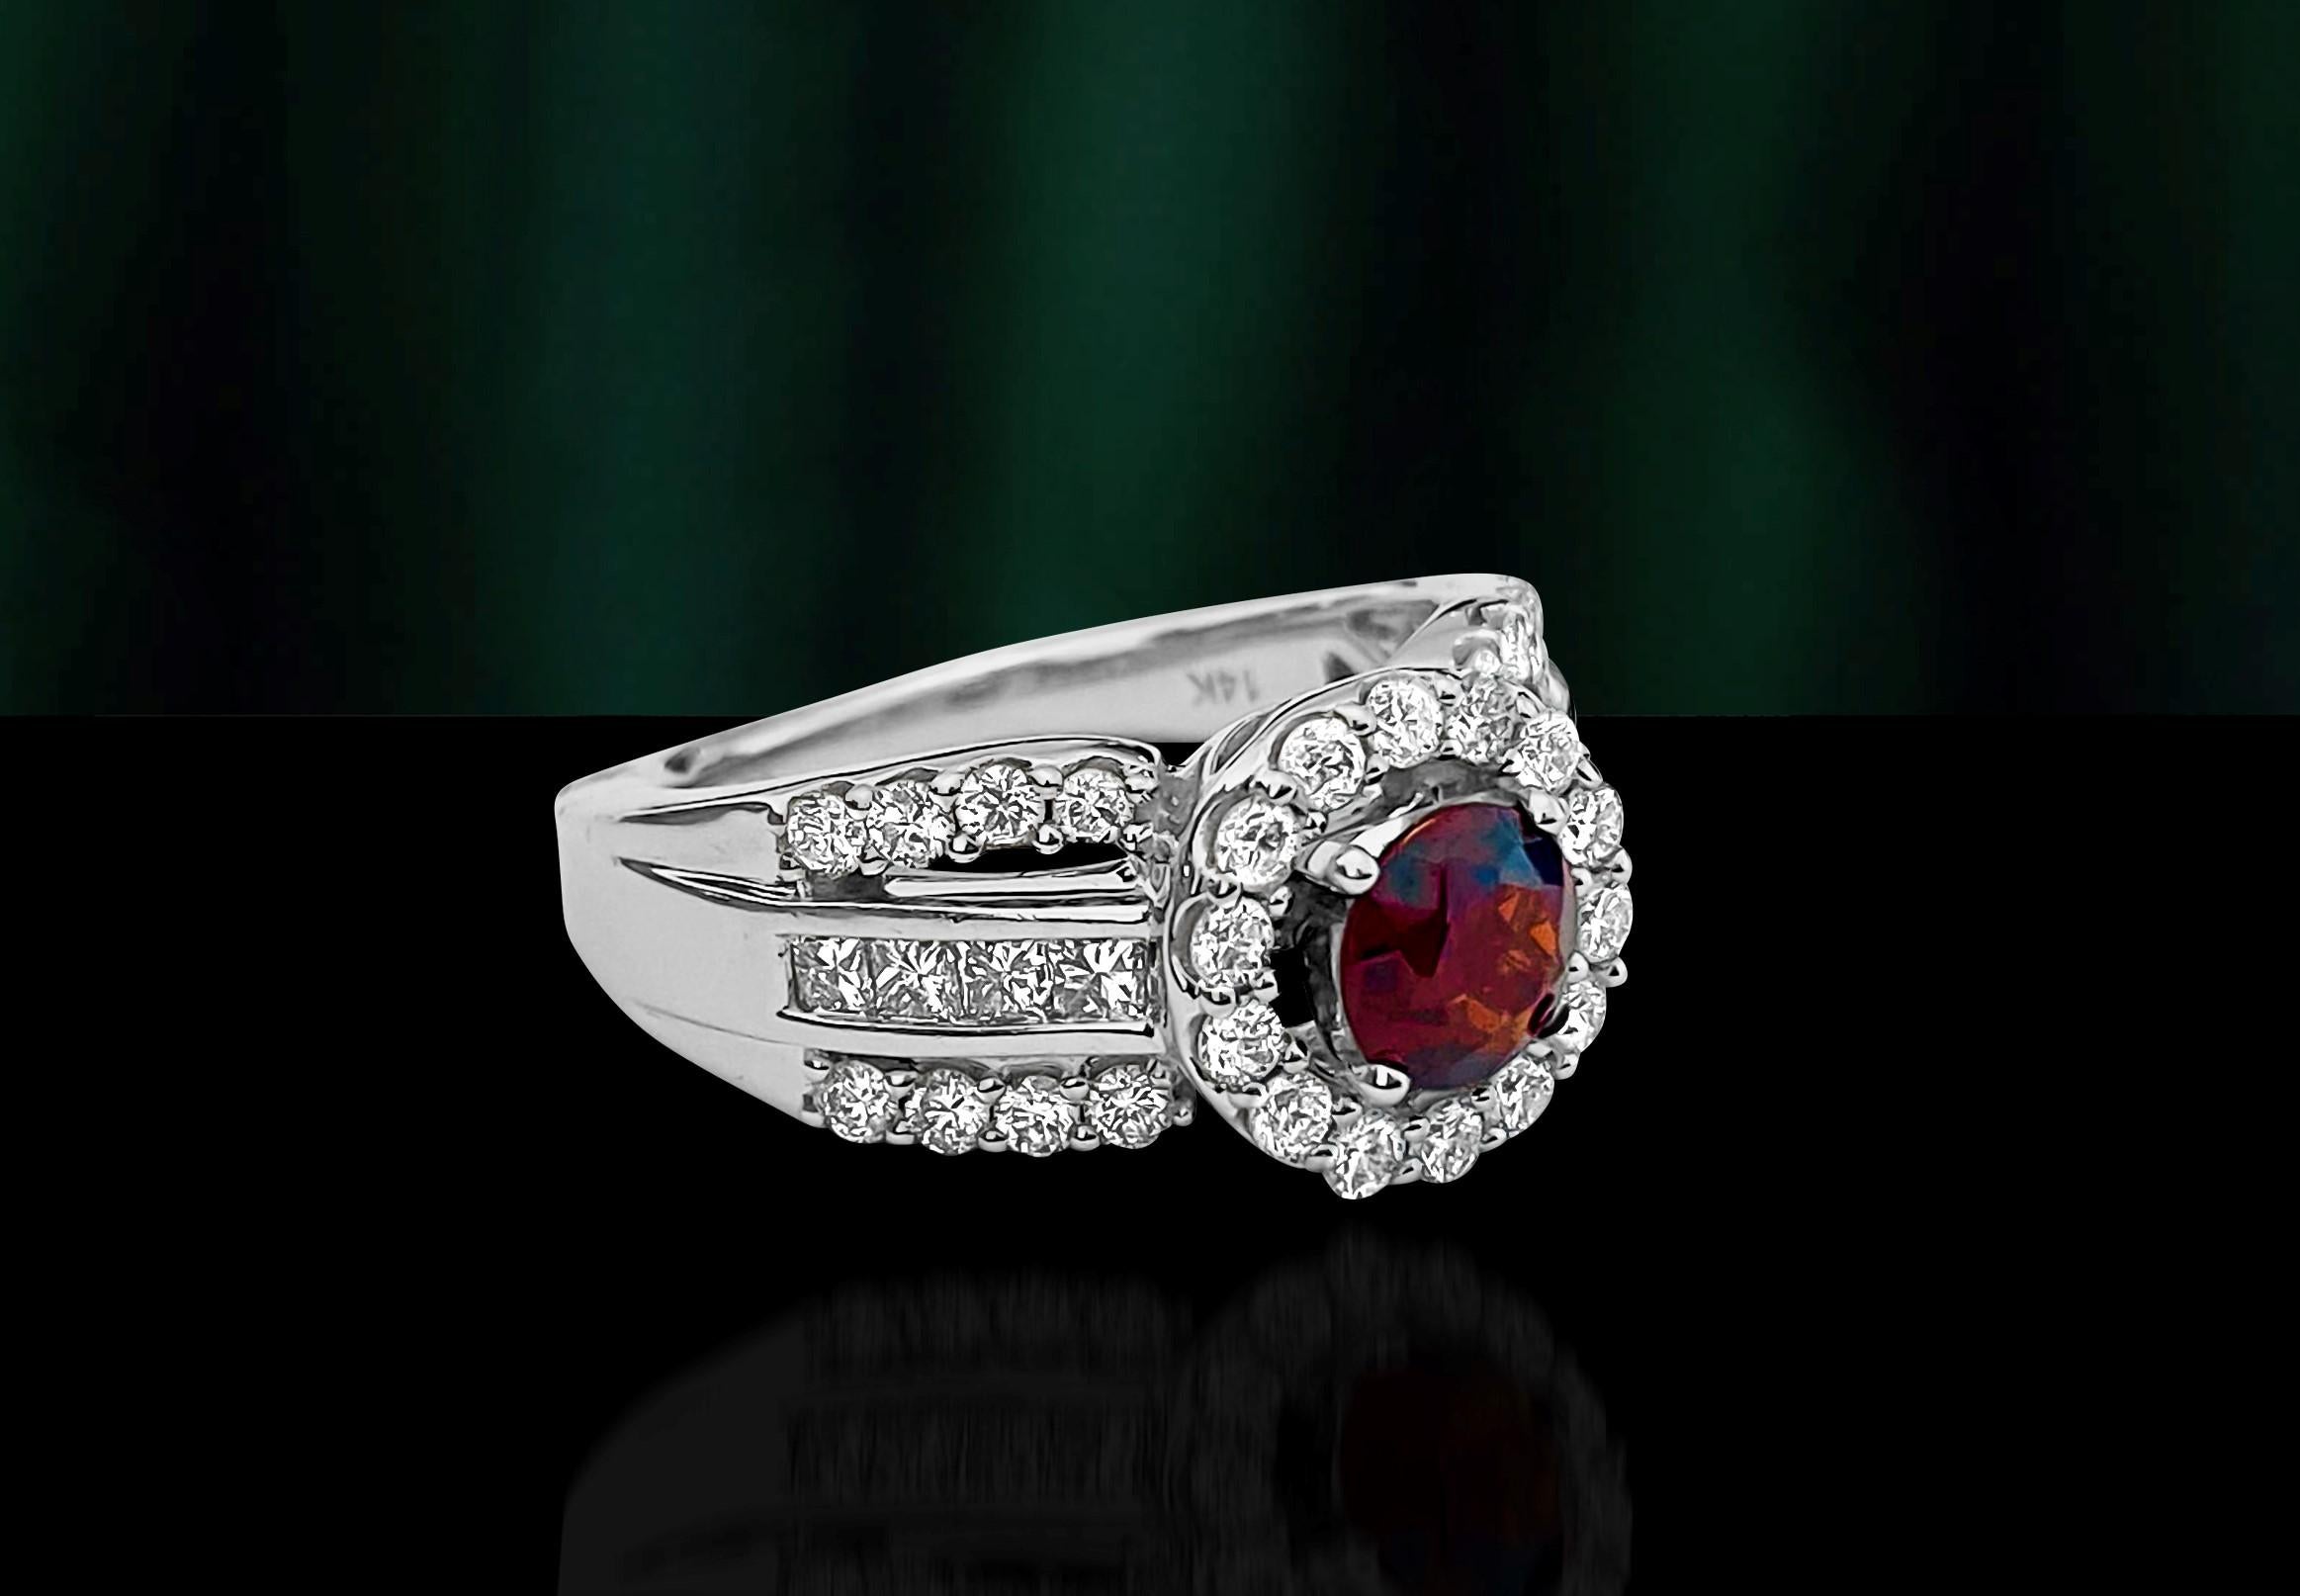 Metal: 14k white gold. 
Diamonds: 1.17cts total. Round brilliant cut. VS clarity and F-G color. 
Garnet: 0.85ct, 6mm approx. Round shape set in prongs. 
Total weight of the ring: 9.21 grams. Excellent luster and shine in the diamonds and garnet.